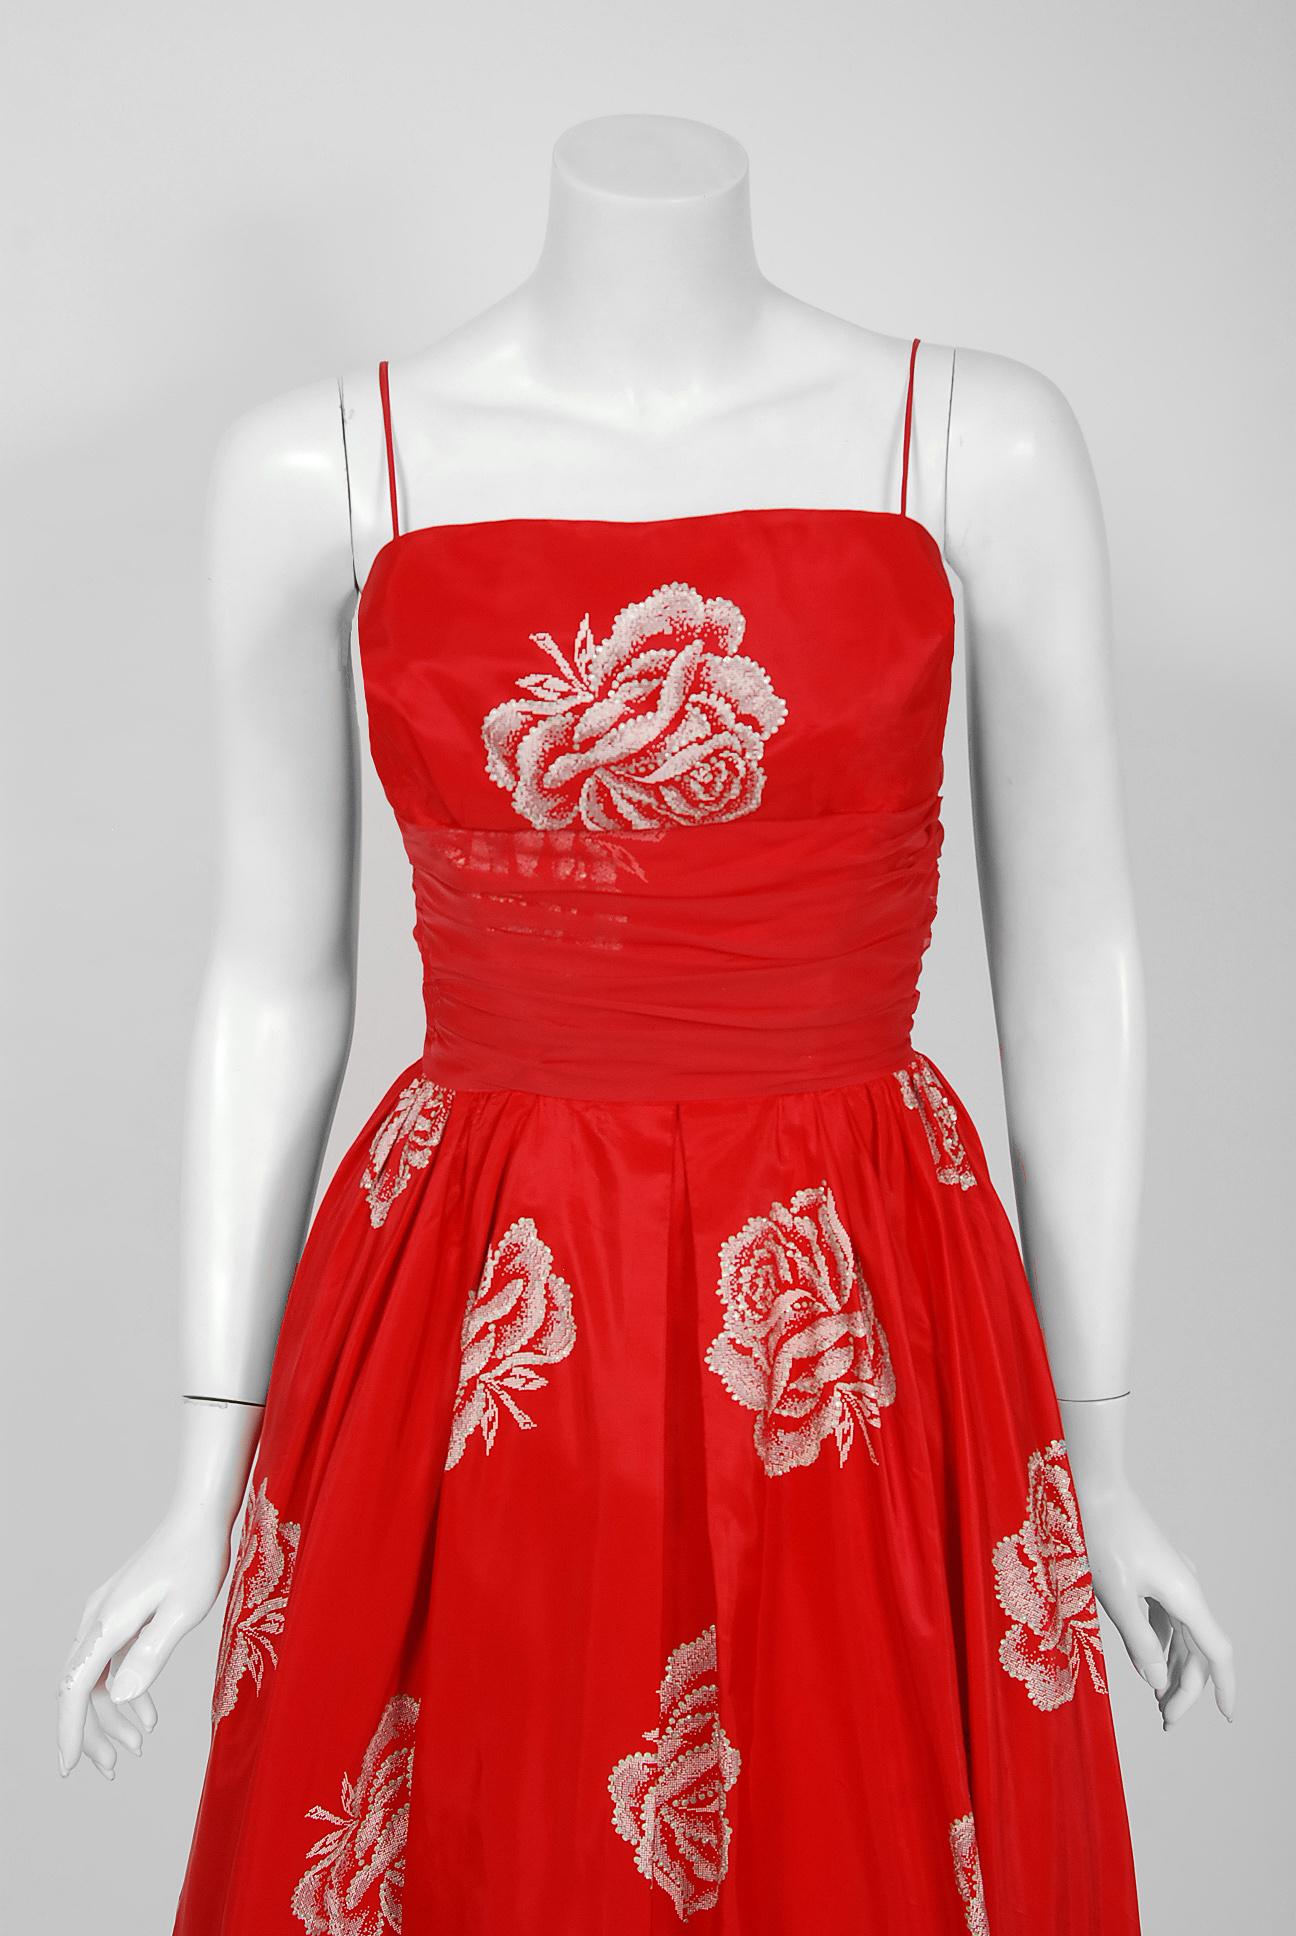 With its shimmering large-scale rose floral print and flawless New Look silhouette, this Lorrie Deb designer party dress has the casual elegance the 1950's were known for. The fabric alone is exquisite; metallic glitter roses on ruby-red 